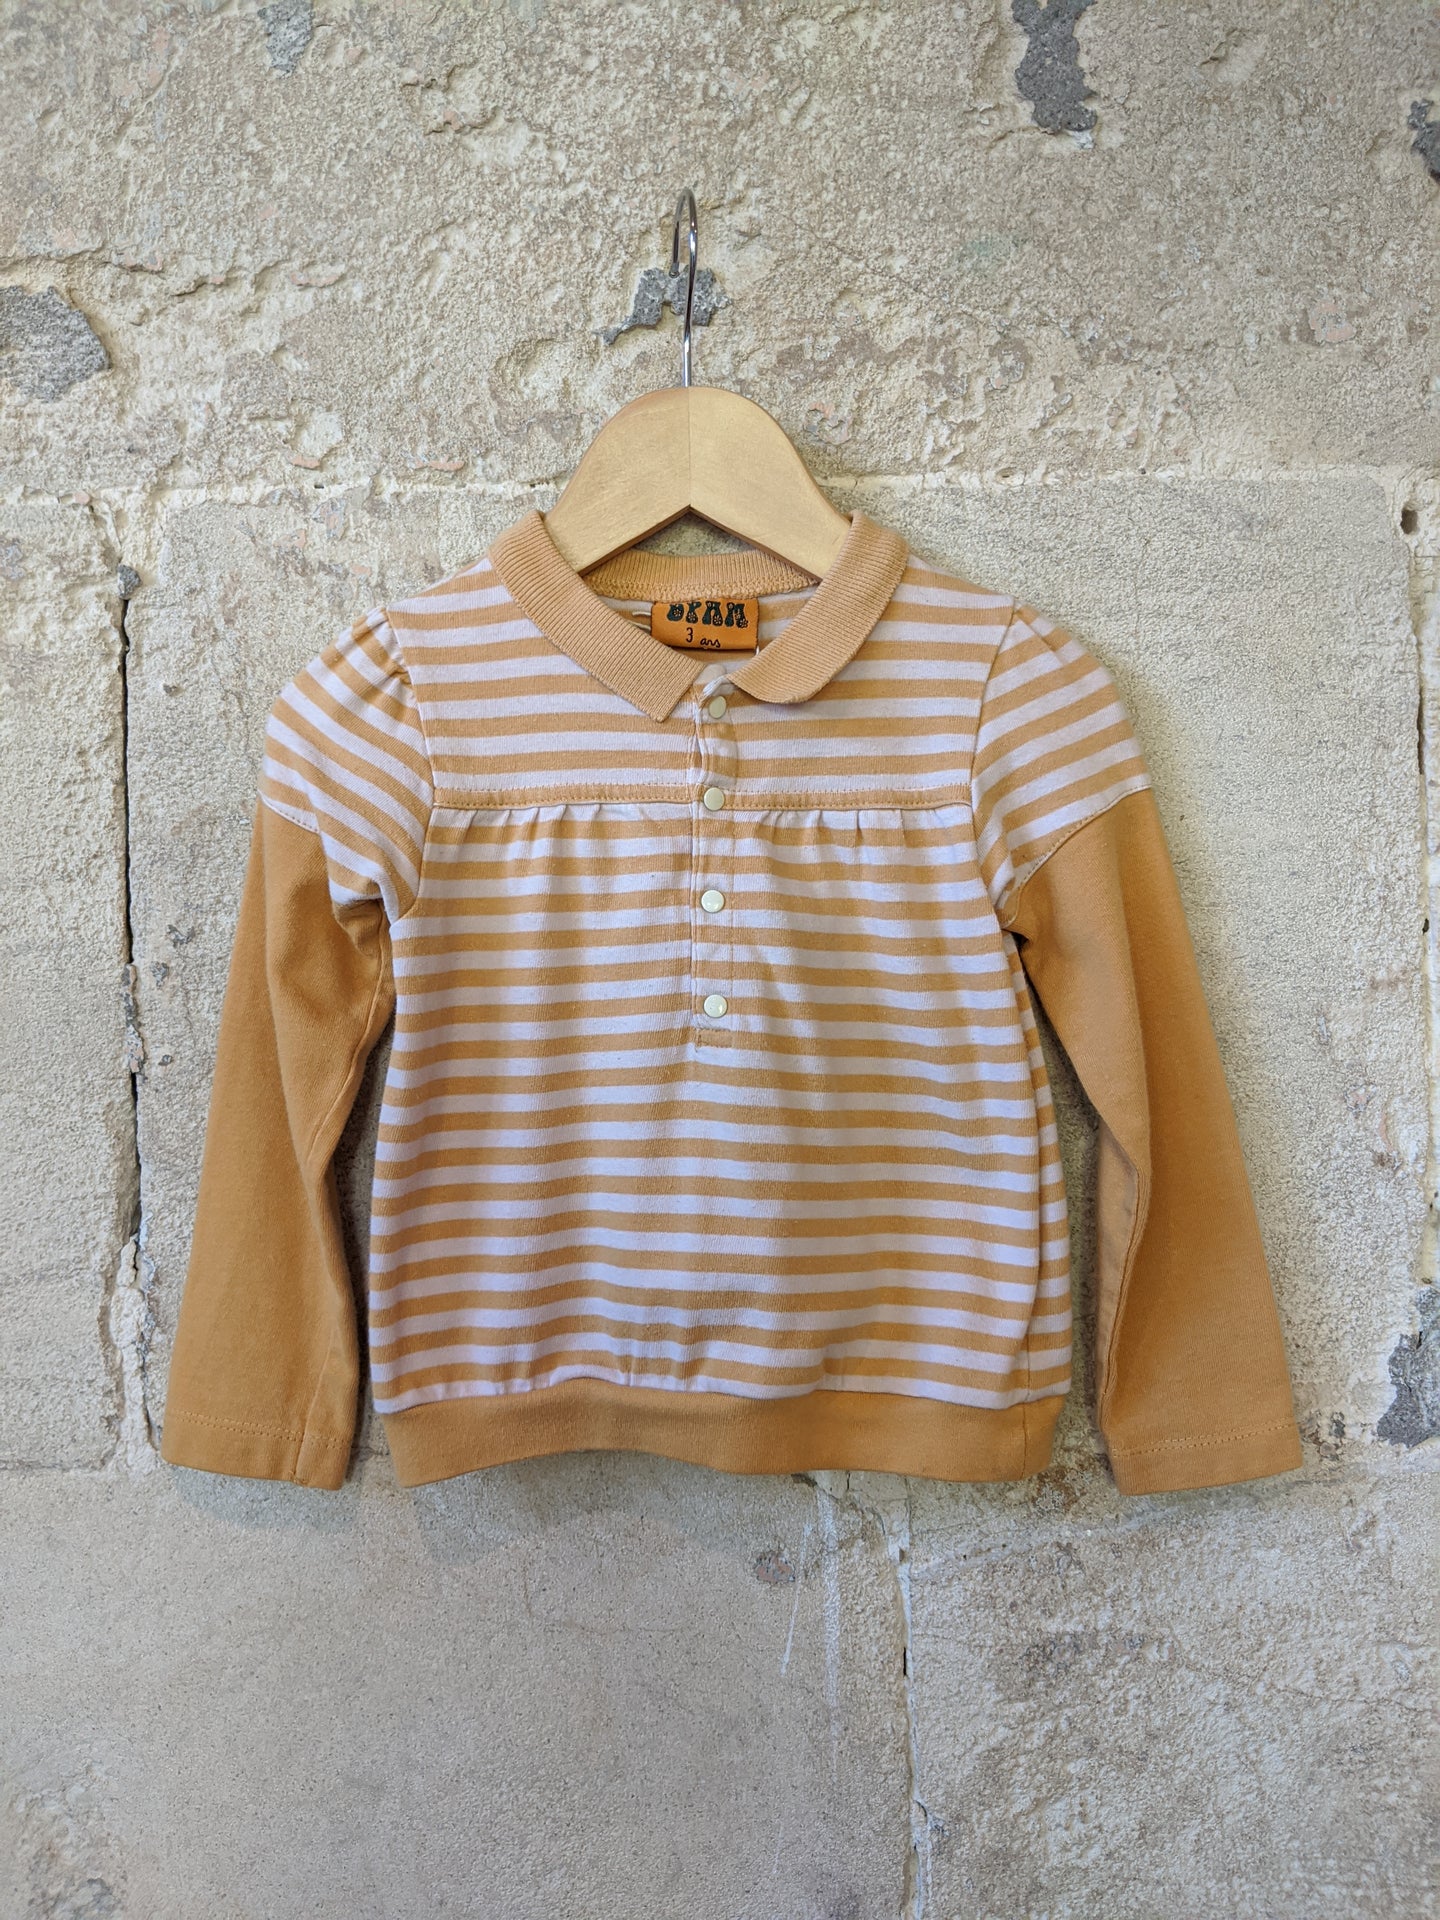 Gorgeous French Mustard Striped Top - 18 Months